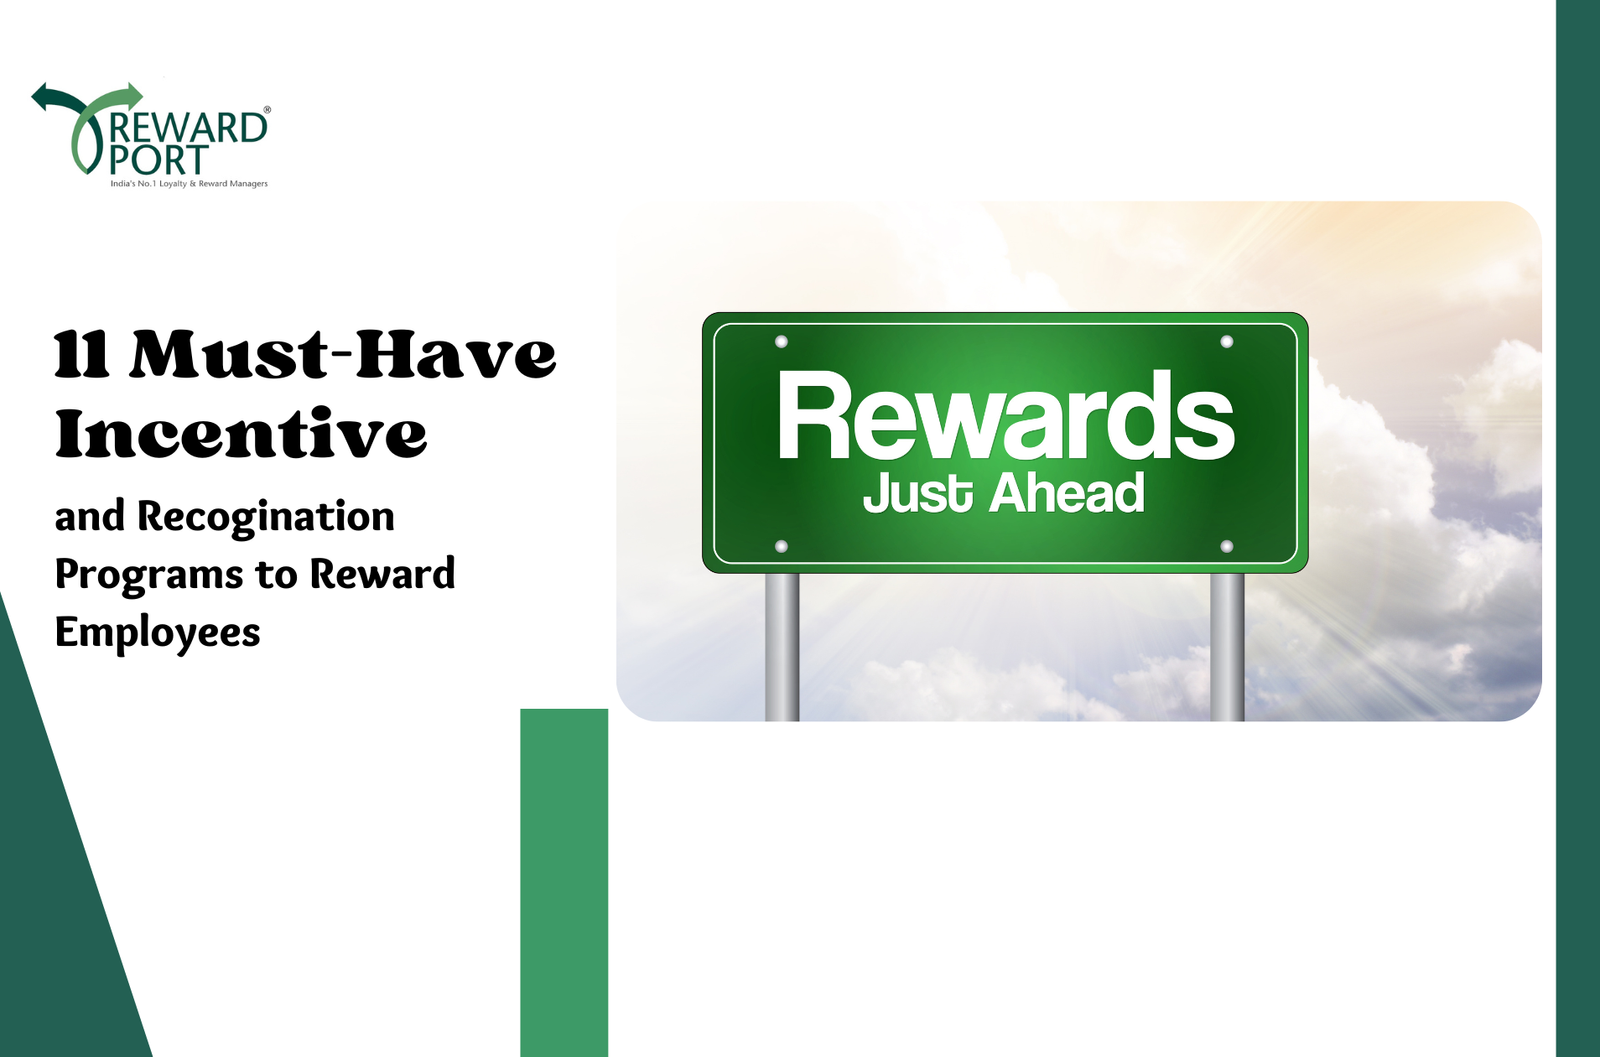 11 Must-Have Incentive and Recogination Programs to Reward Employees